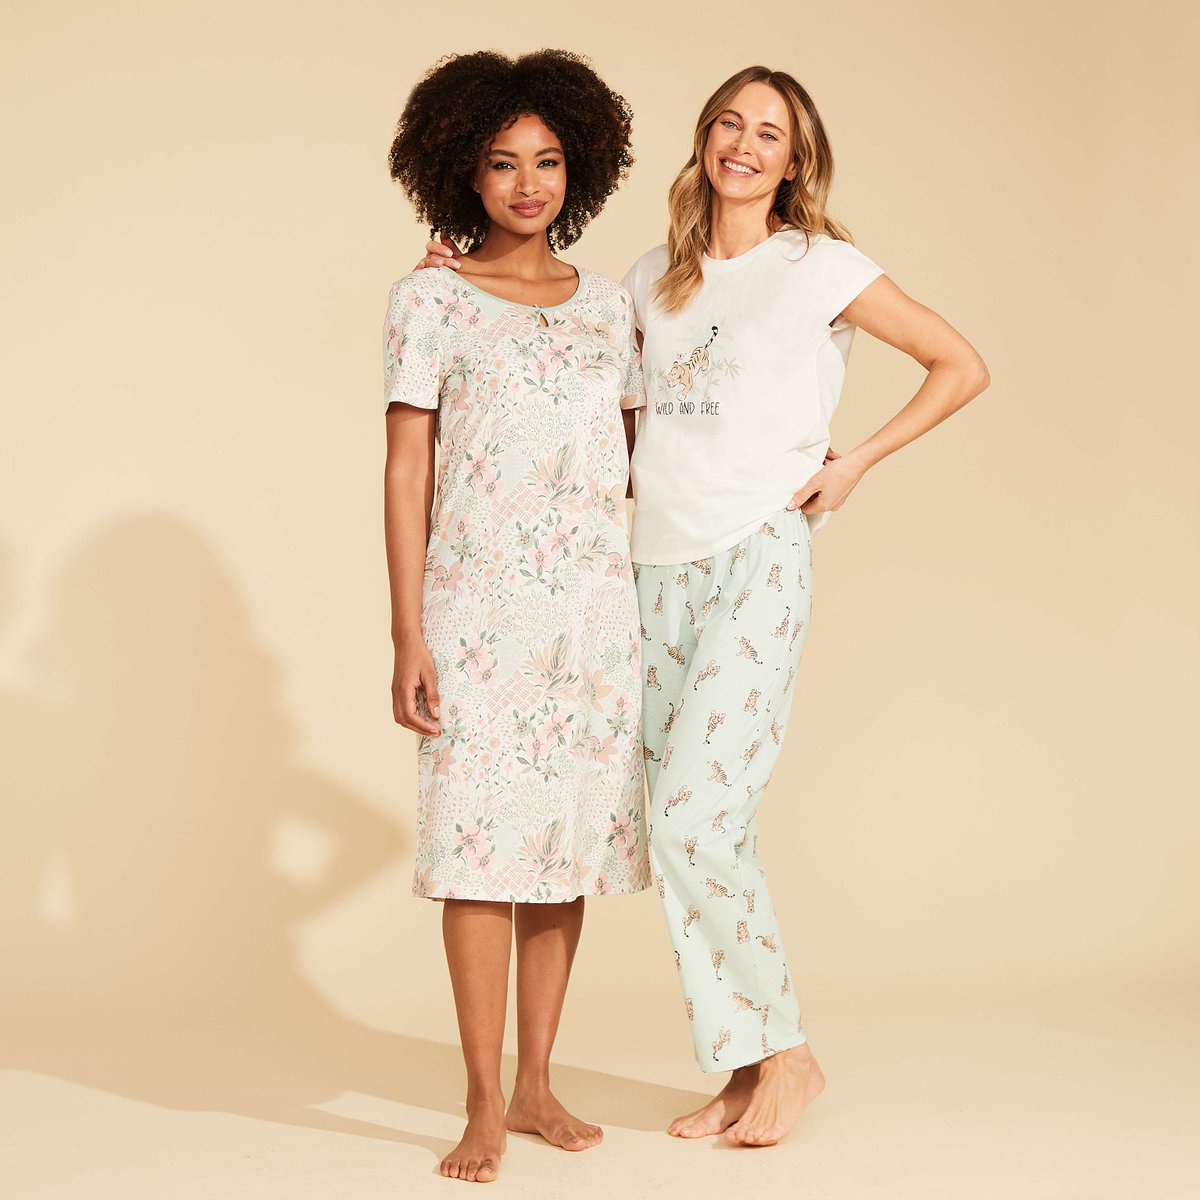 New launch alert! 🚨

Update your holiday wardrobe with @bonmarche’s latest range of Autonomy summer clothing ☀️ and sleep easy in their new selection of cute and cosy nightwear 💤

#Bonmarche #NewLaunch #NewCollection #SummerWear #HolidayShop #Nightwear